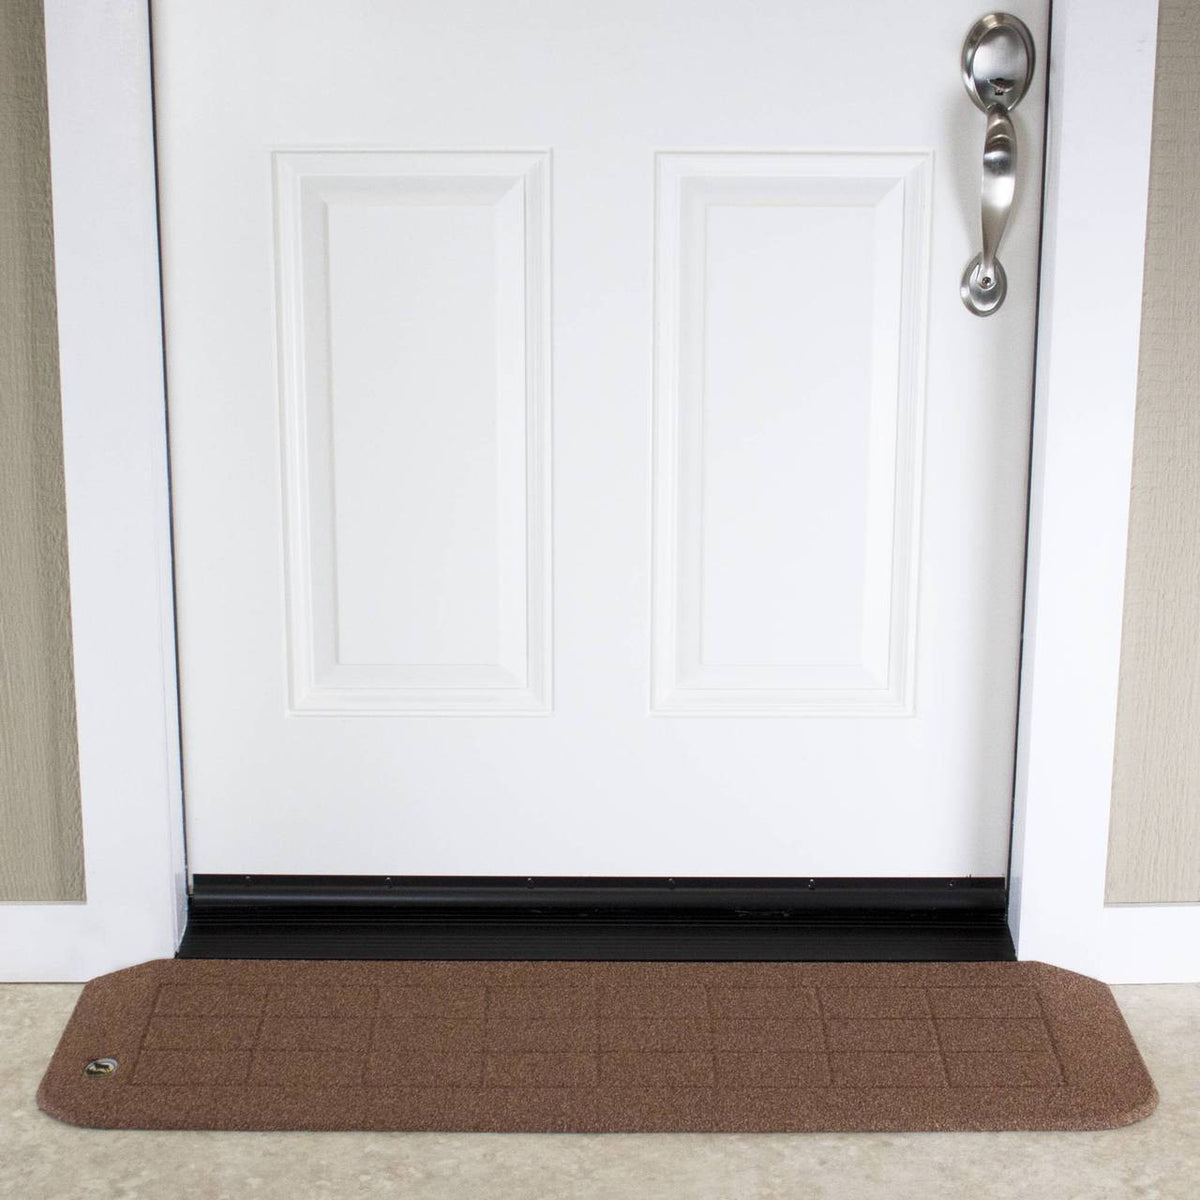 Safepath Door Threshold Ramps from Recycled Rubber